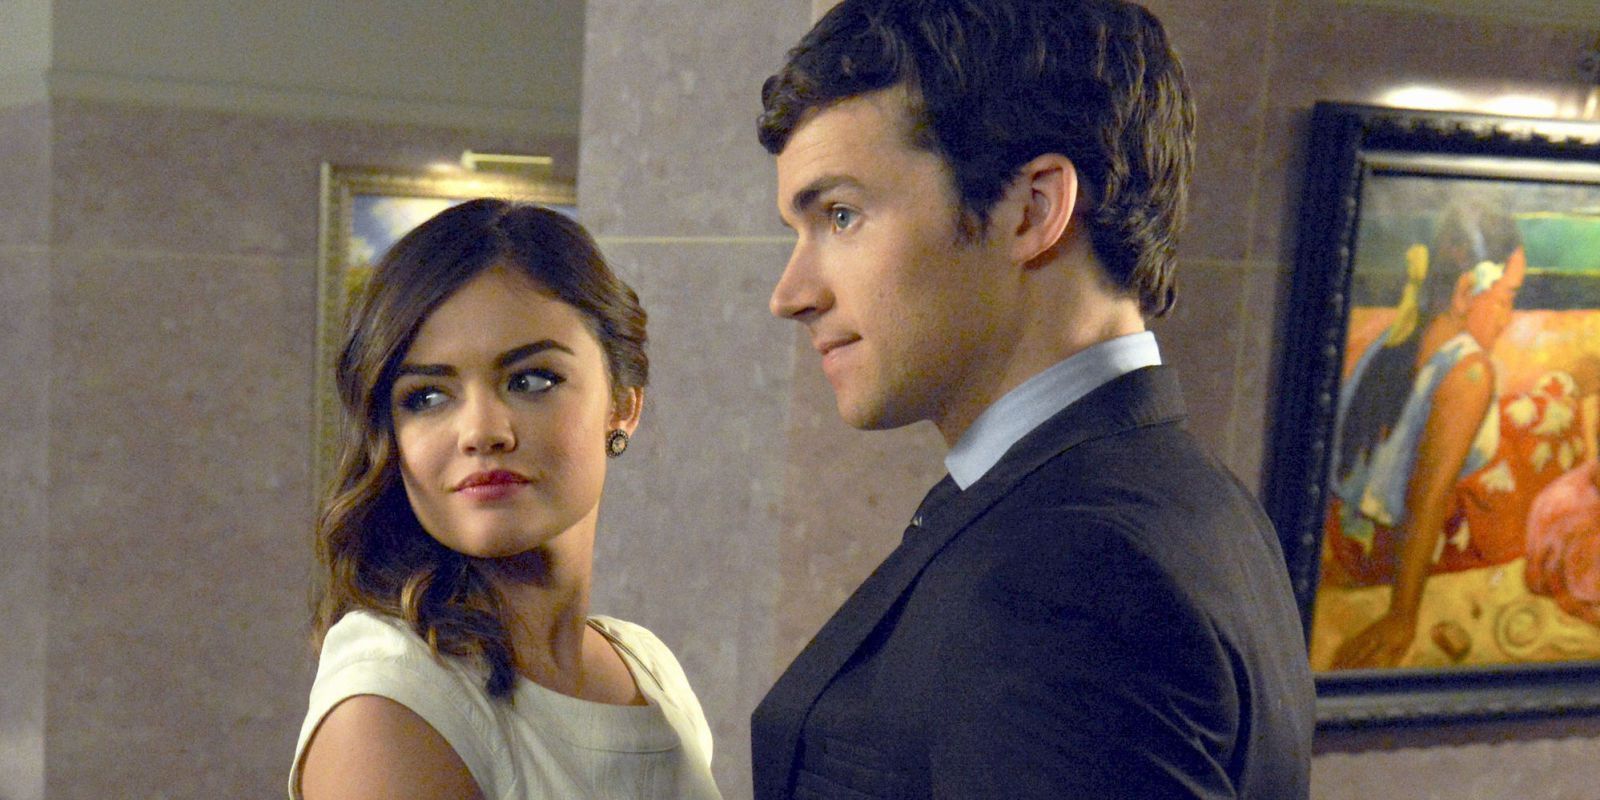 Aria and Ezra looking out of frame